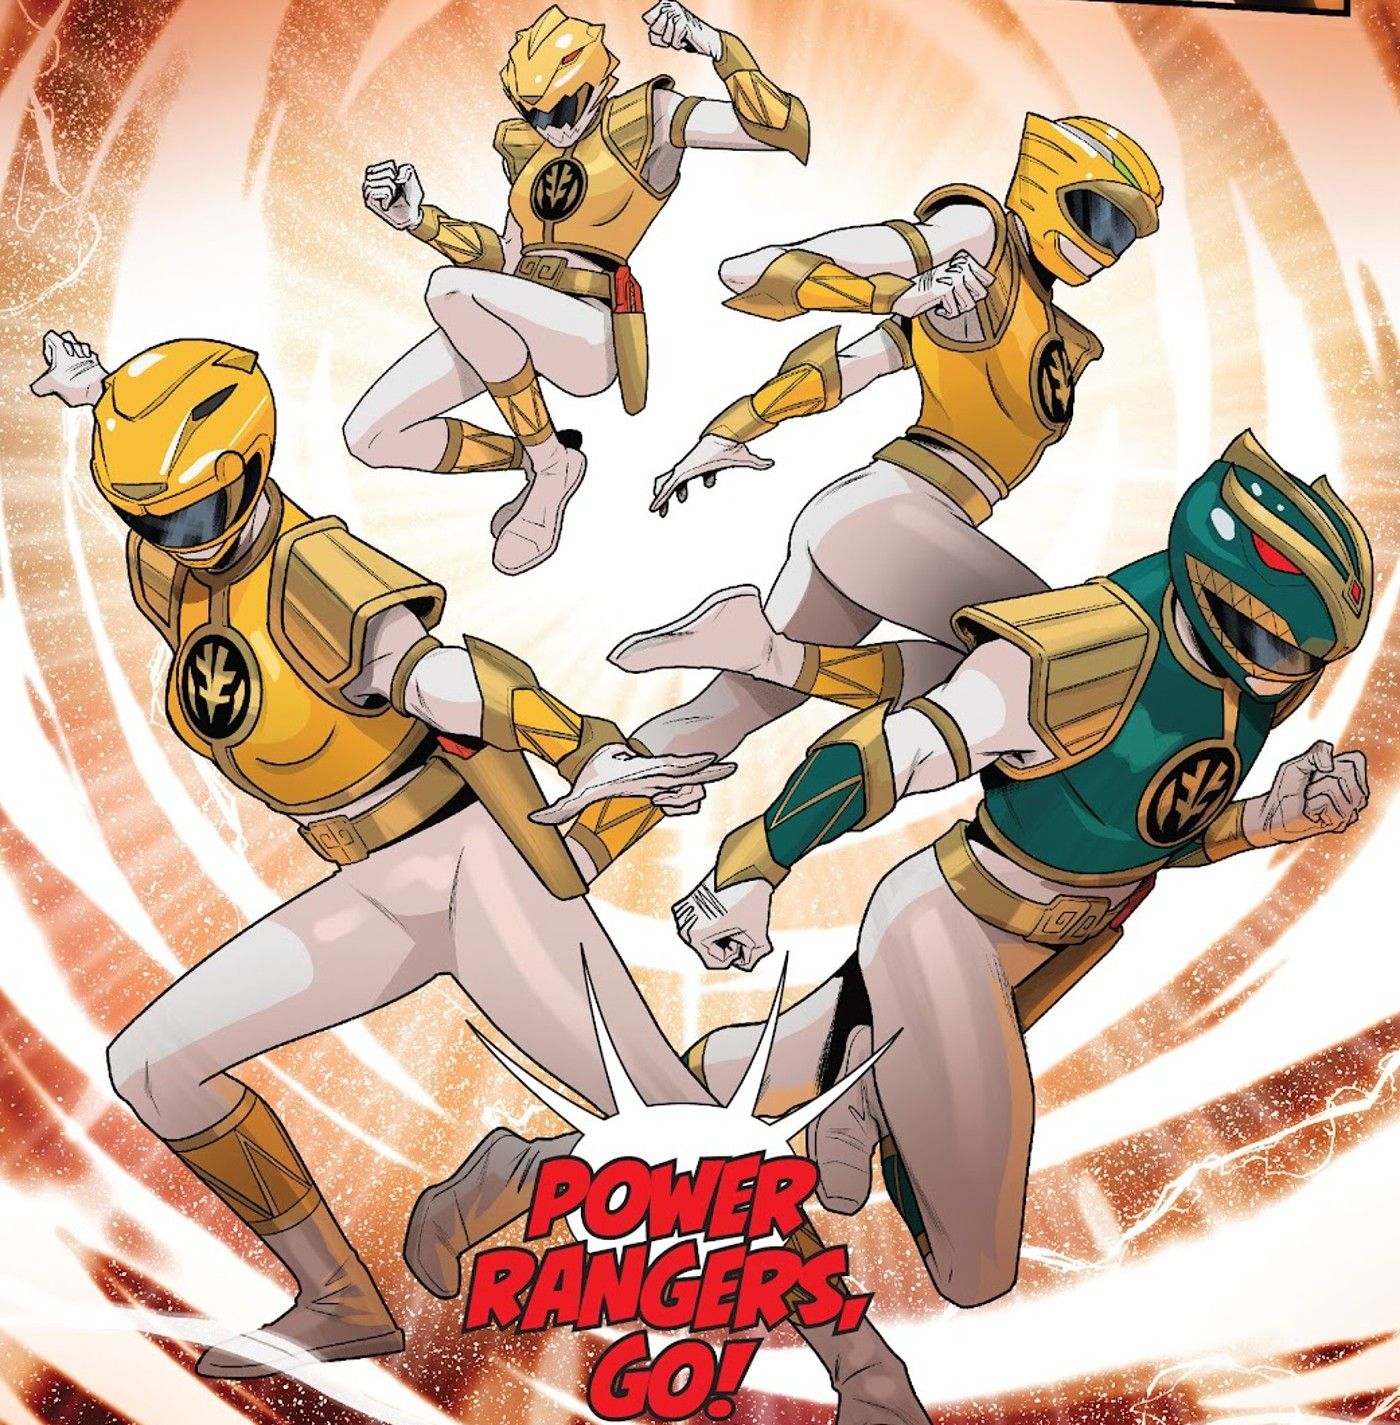 Power Rangers Assembles Most Powerful Team of All Time (Thanks to Tommy Oliver)